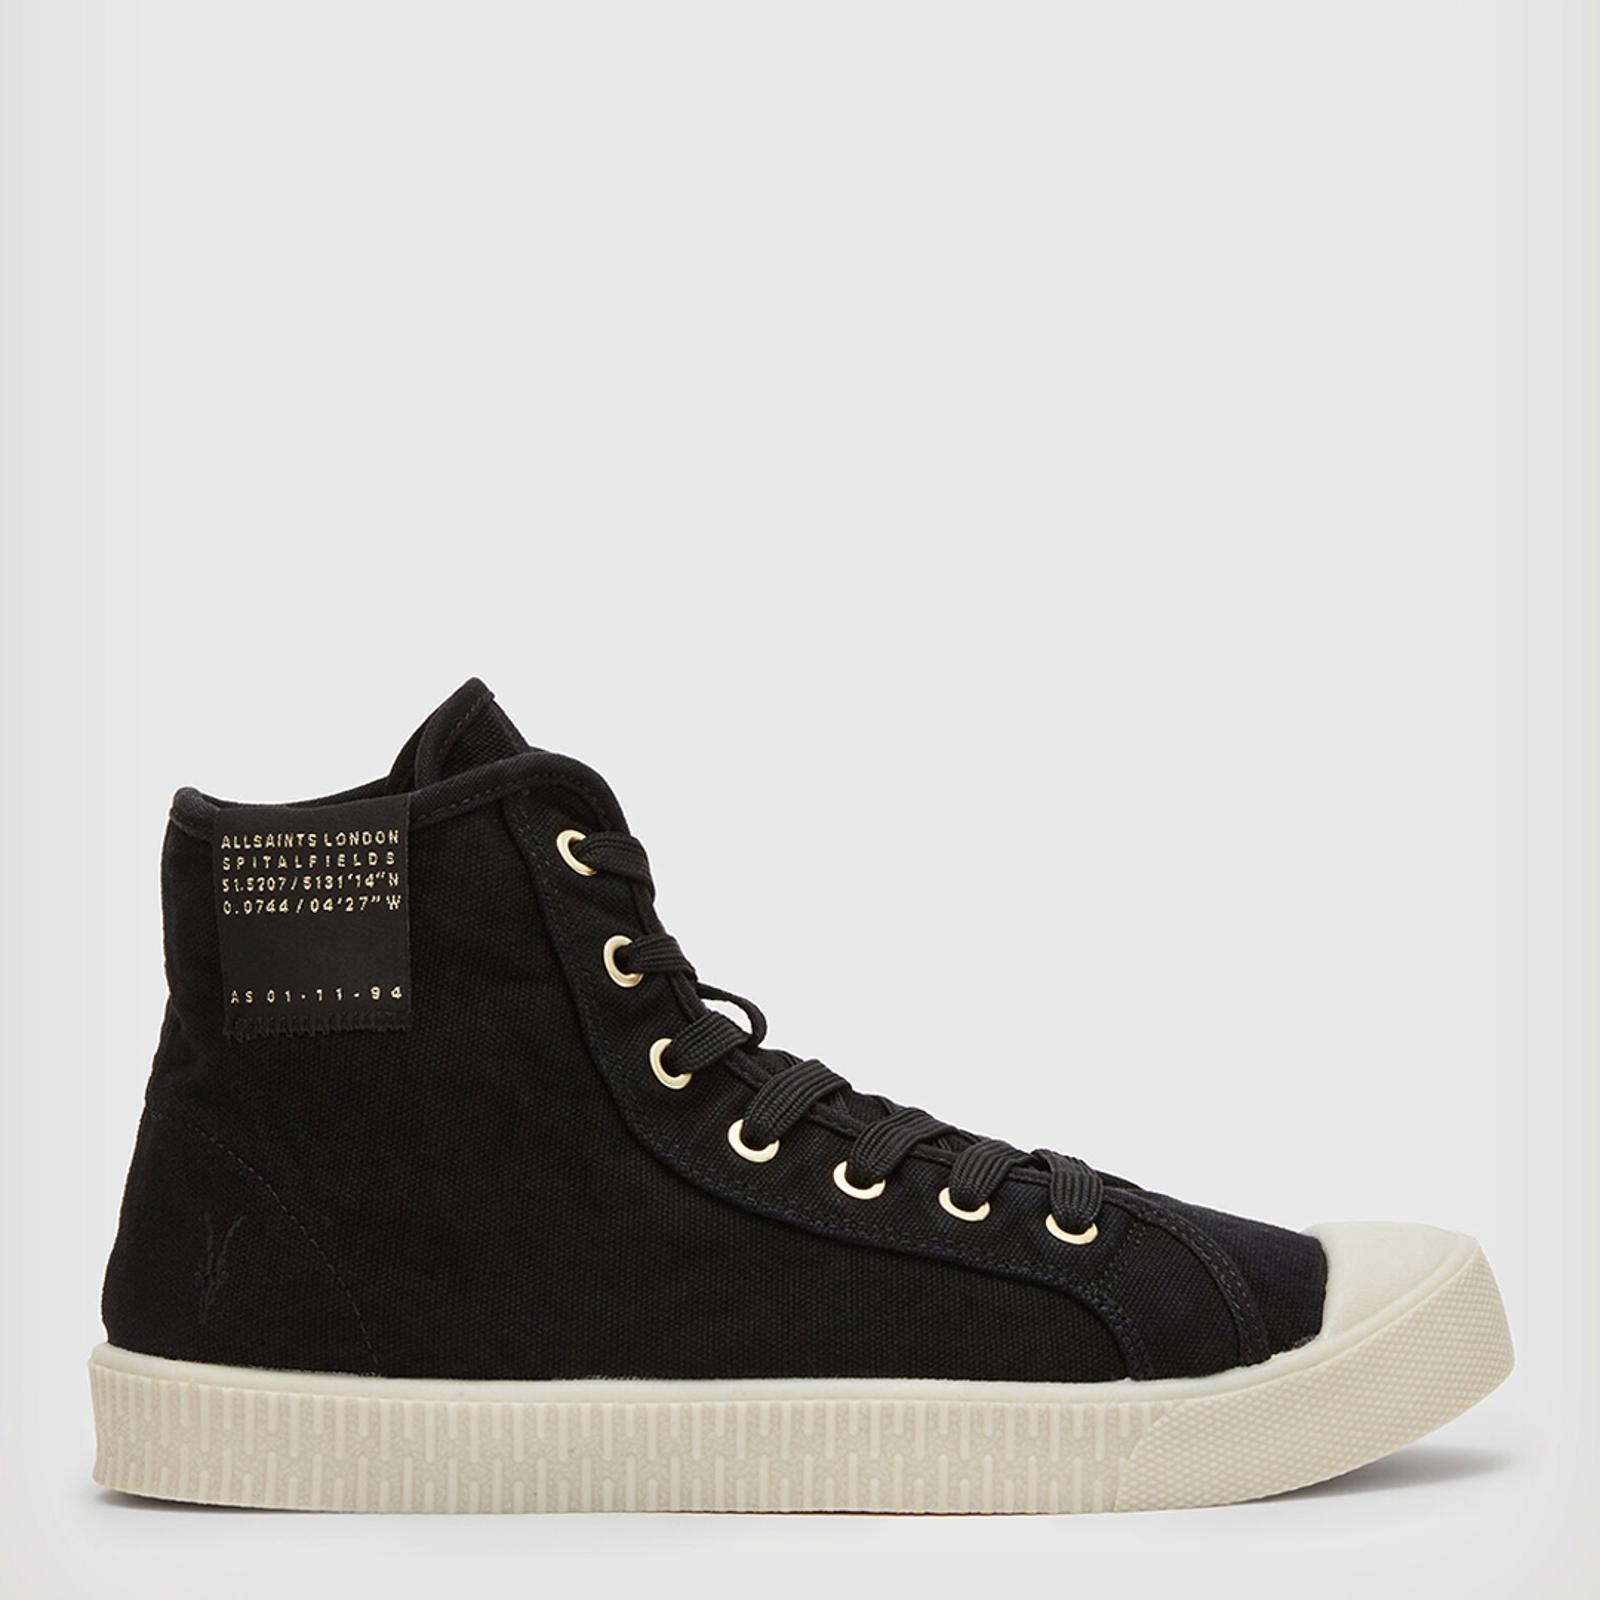 Black Demmy High Top Trainers - BrandAlley